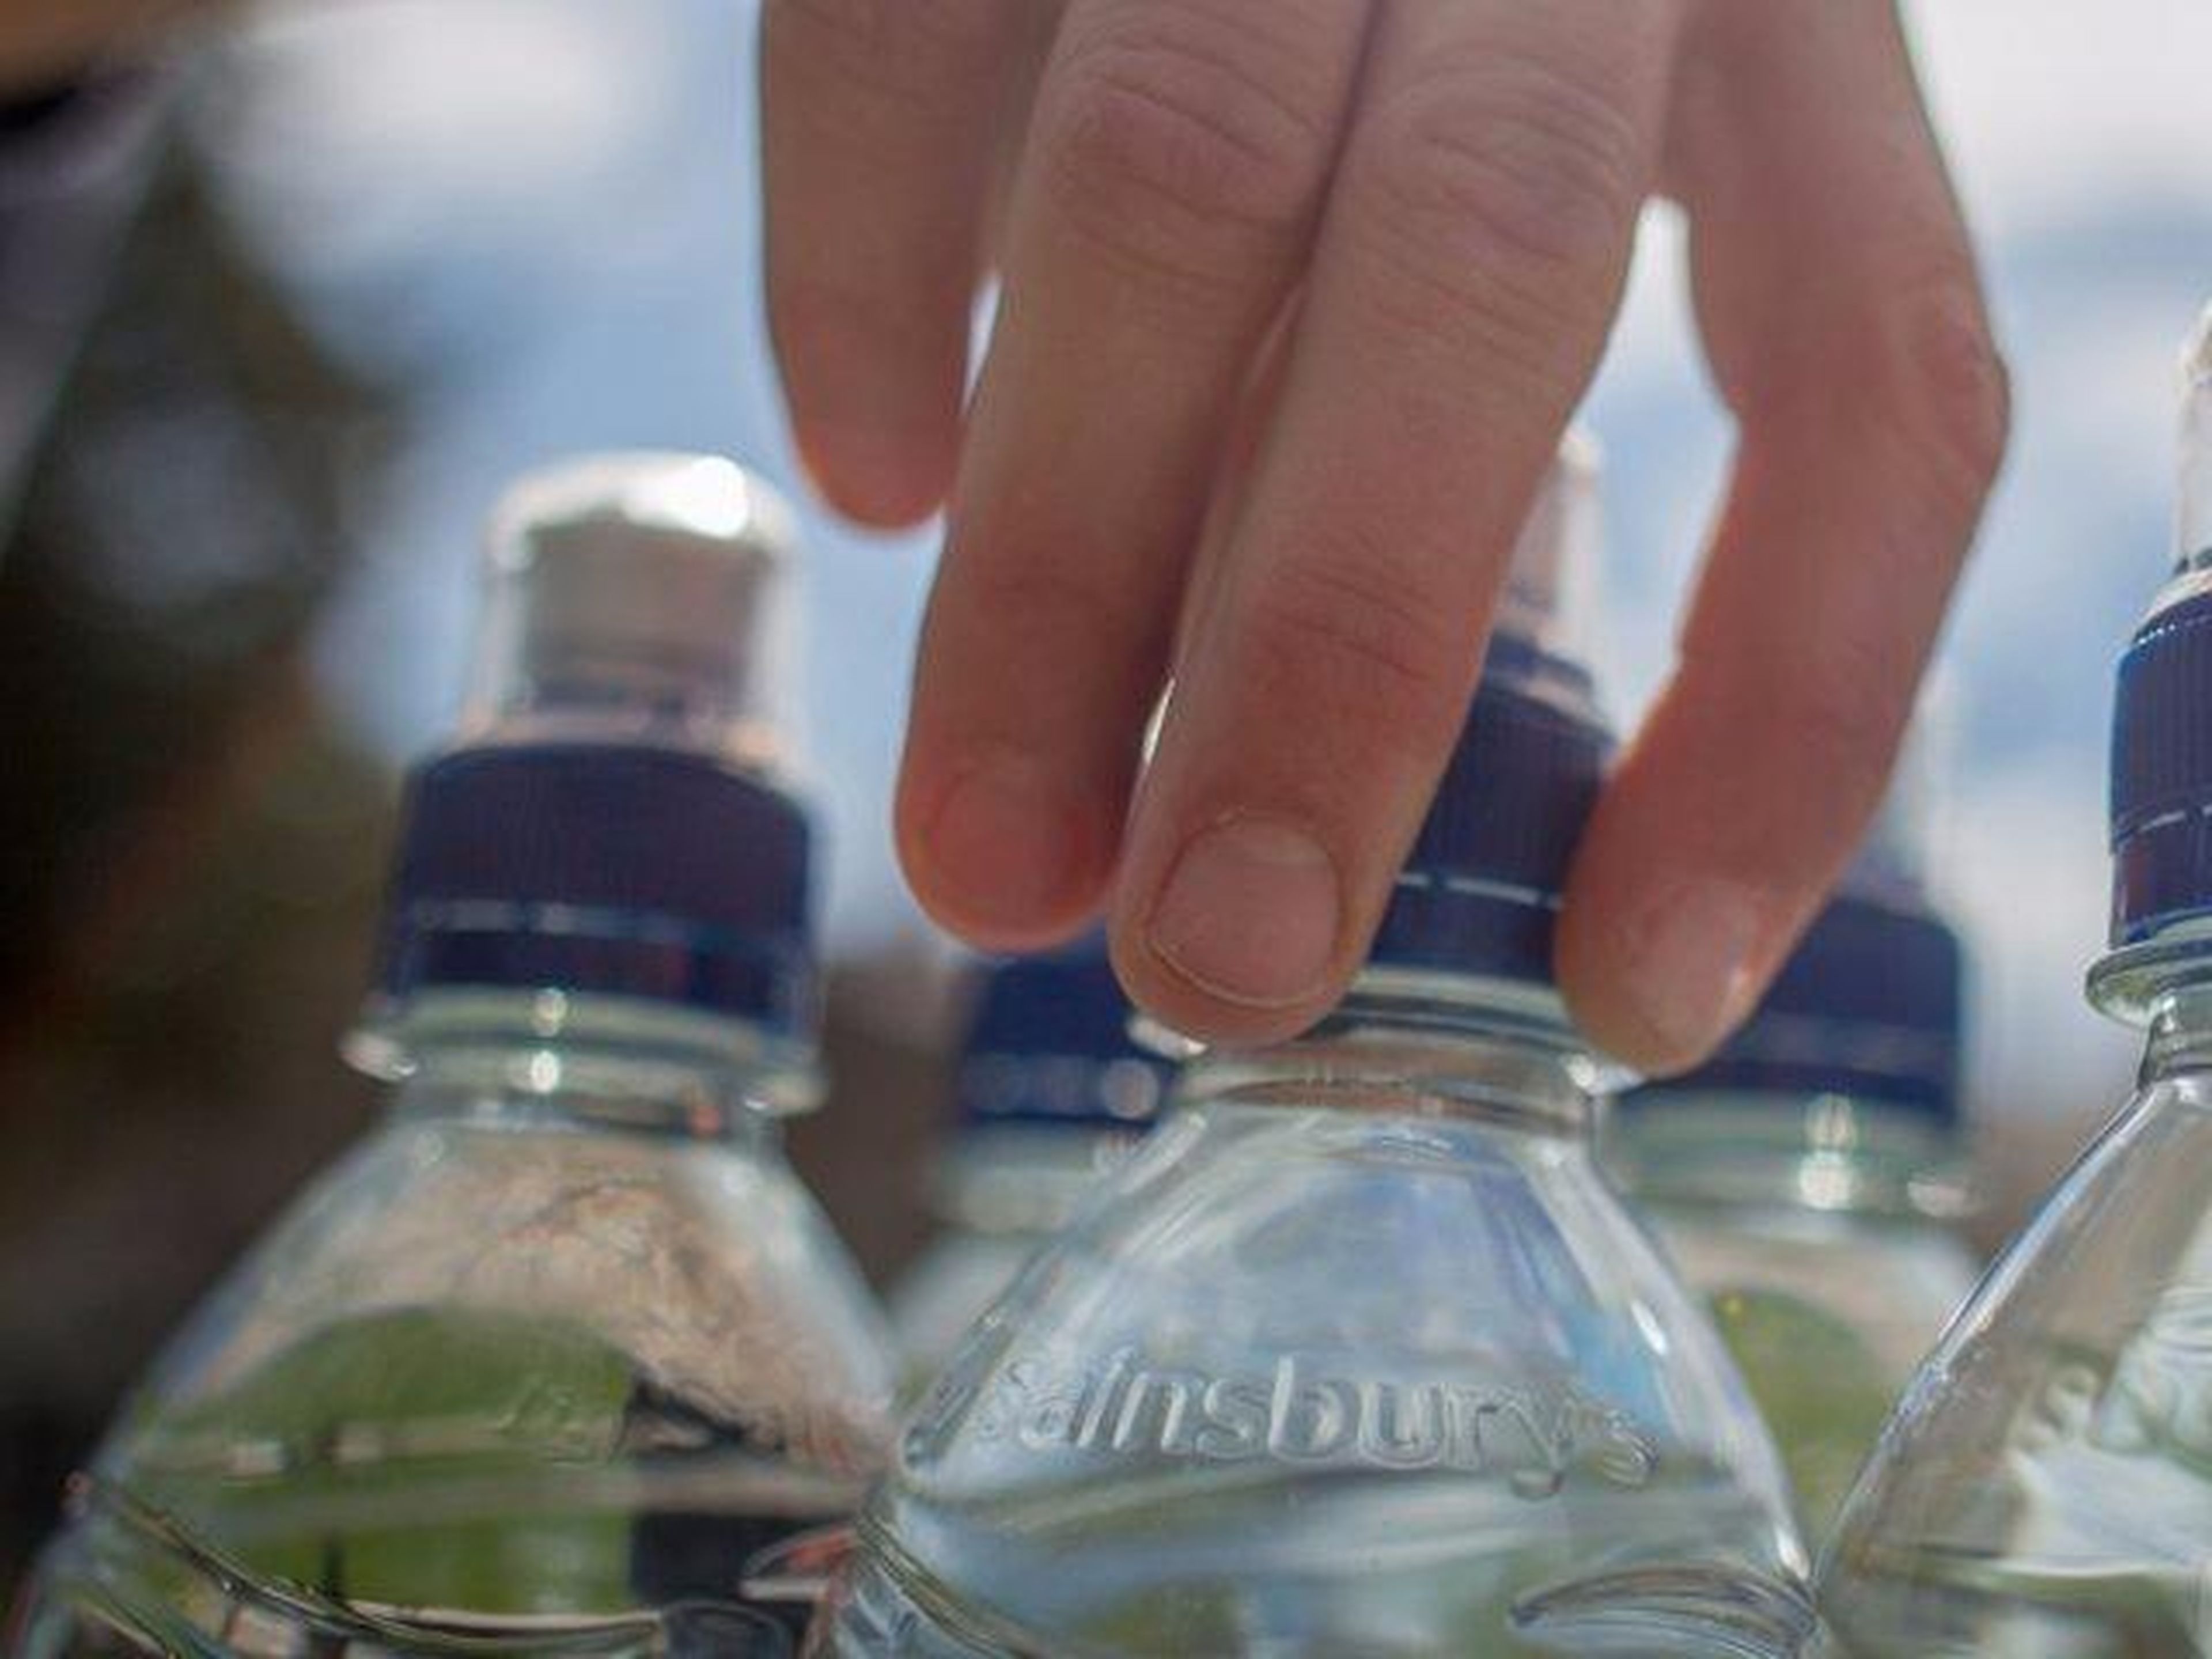 A reusable water bottle could save you money in the long-run.